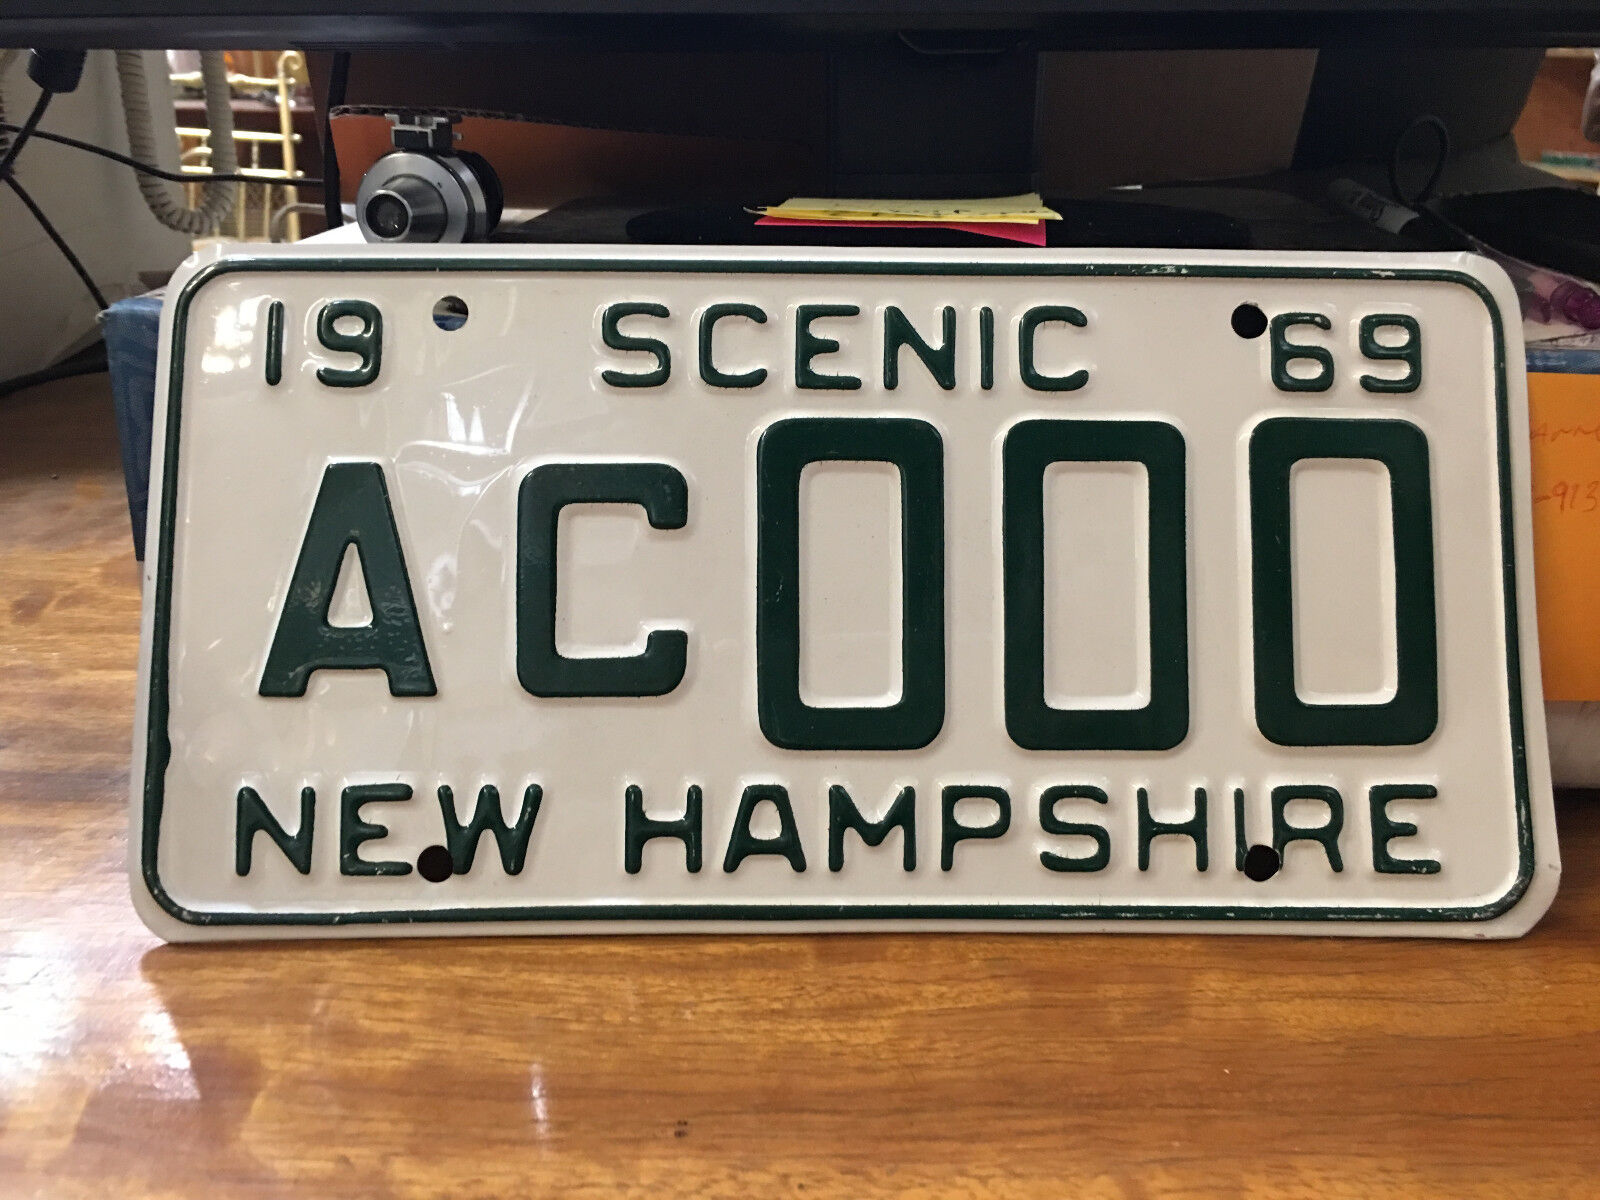 Original 1969 New Hampshire License Plate from 20th Century Fox Archives